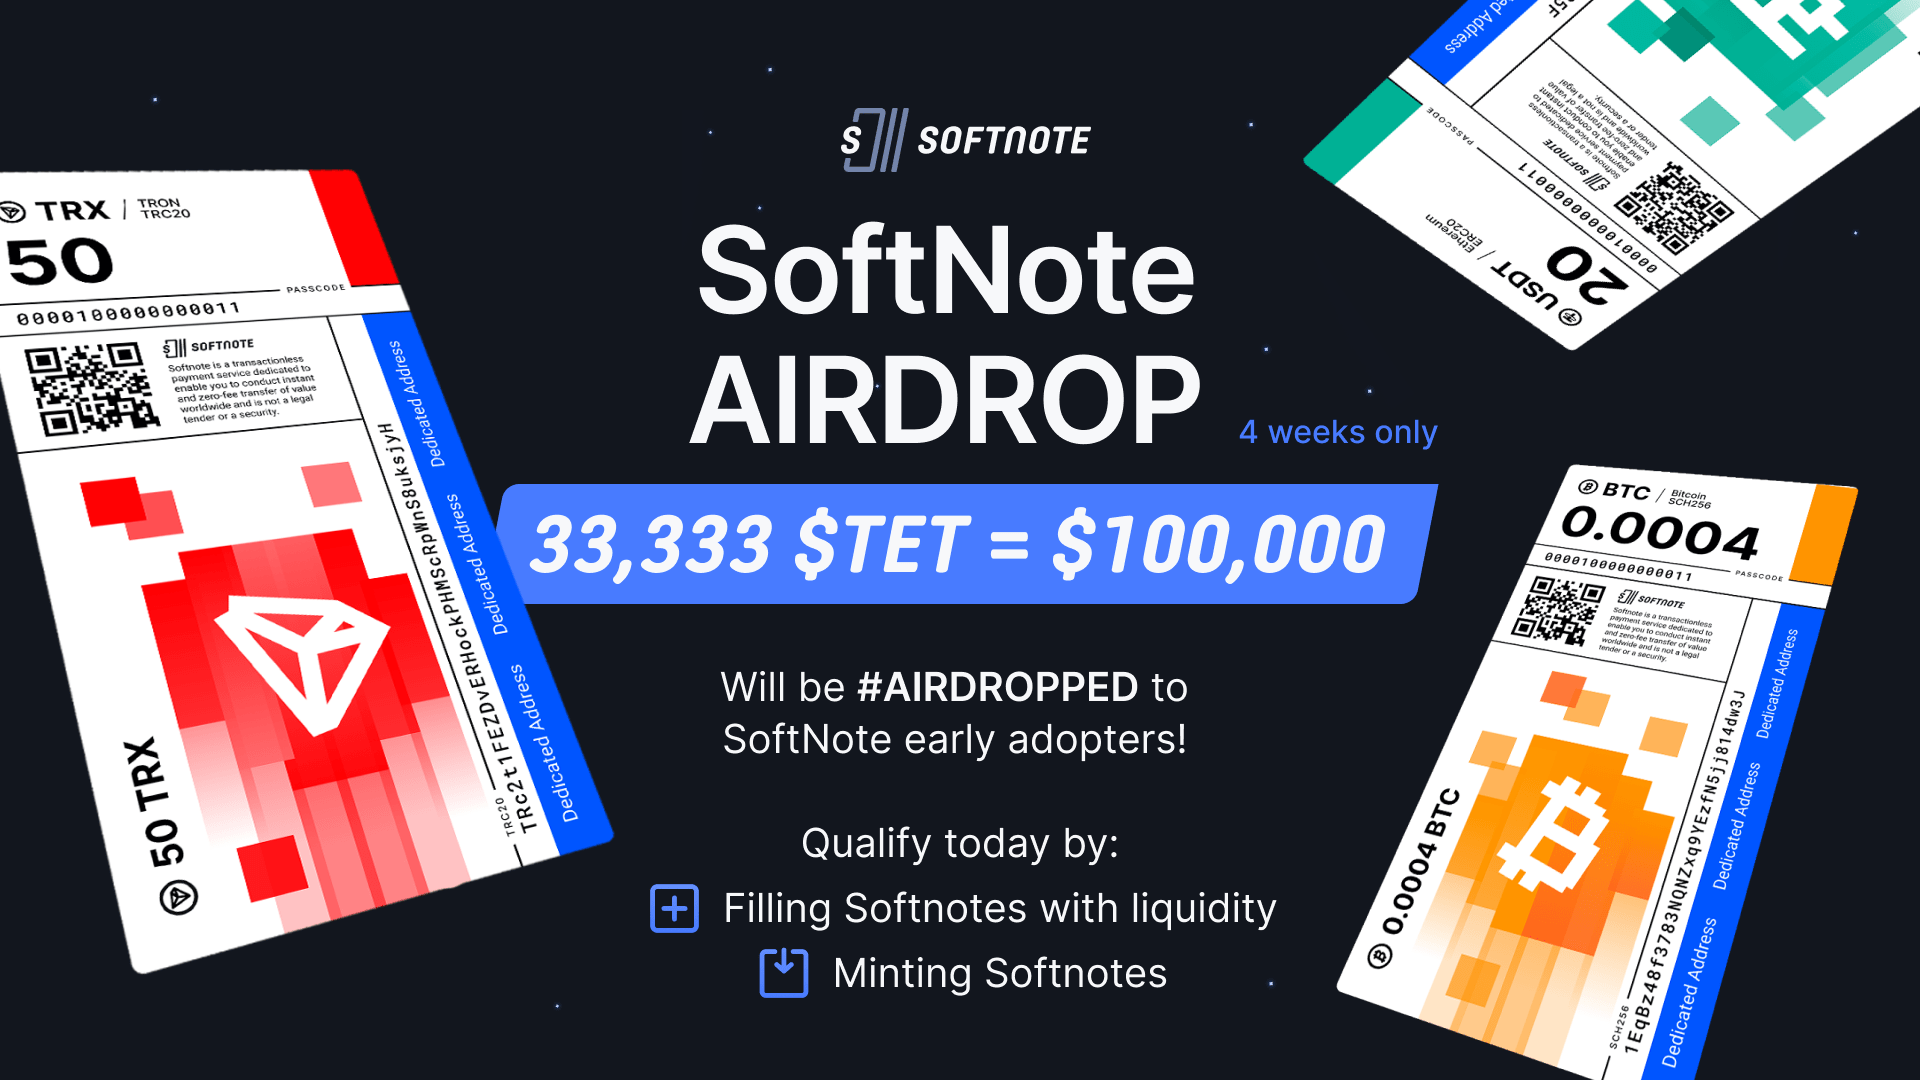 Announcing the Tectum SoftNote Airdrop